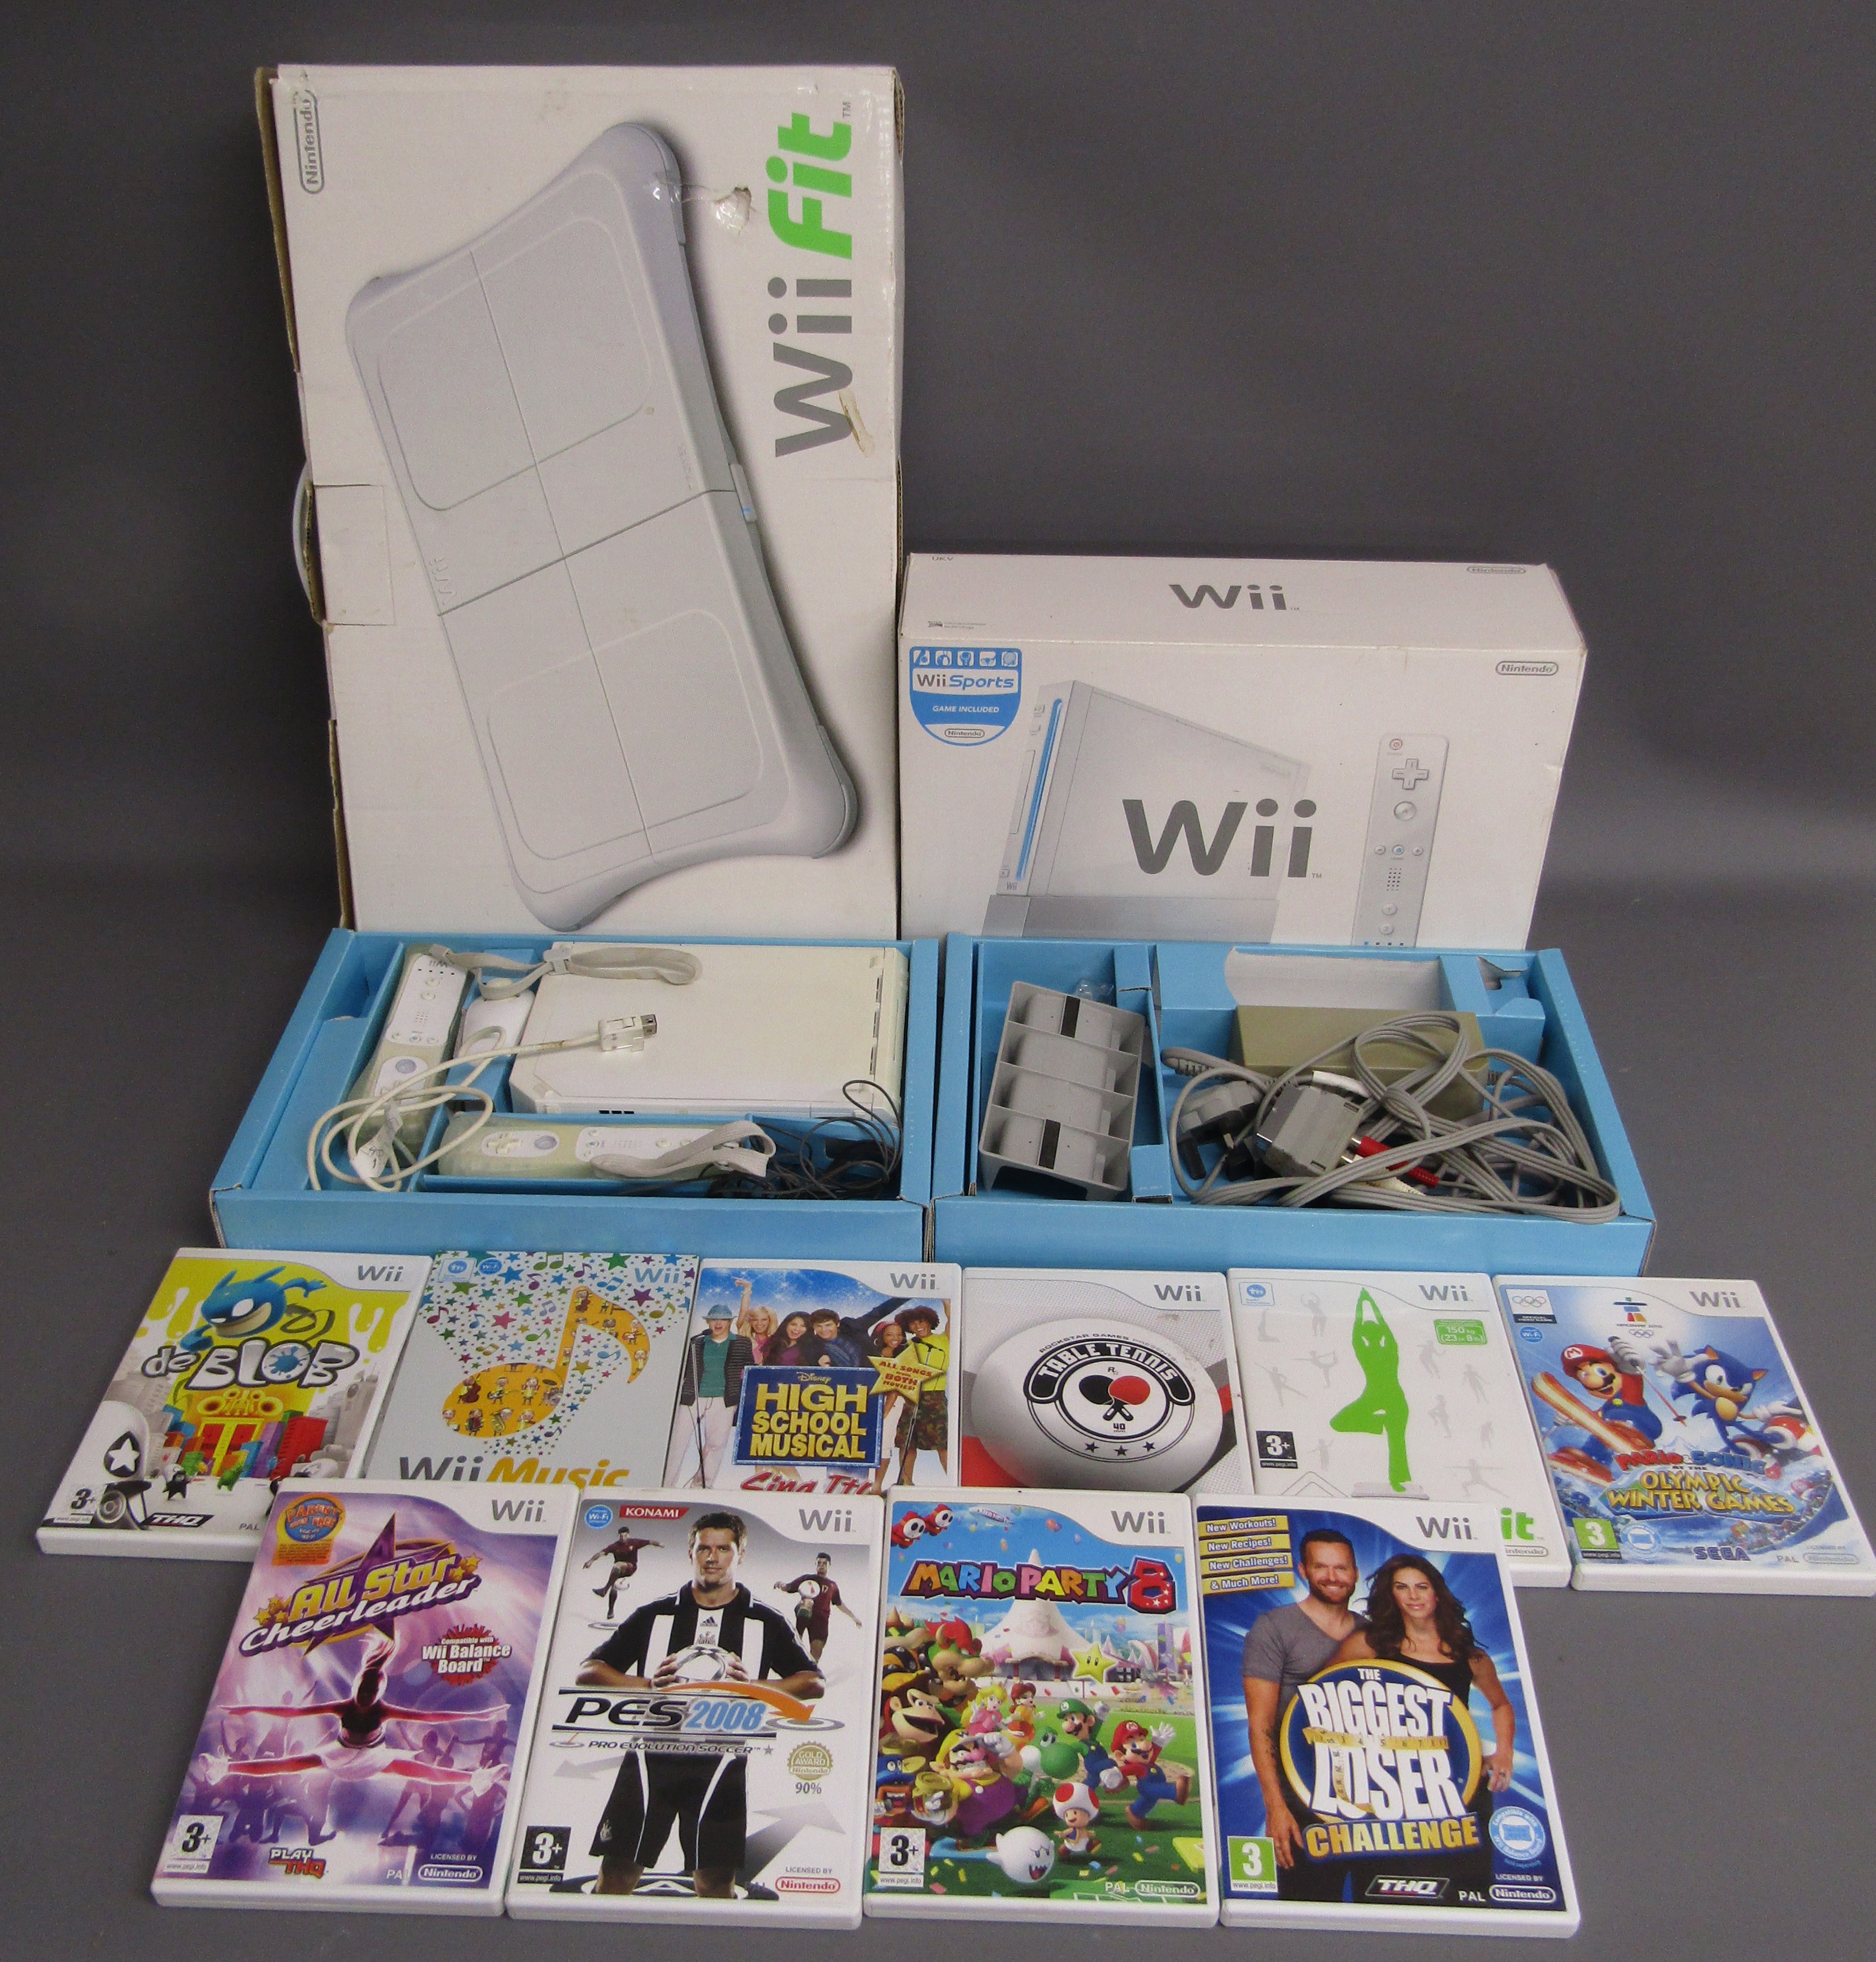 Nintendo WII consoles, WII fit board and games including Mario Party 8 (advised Cheerleader is